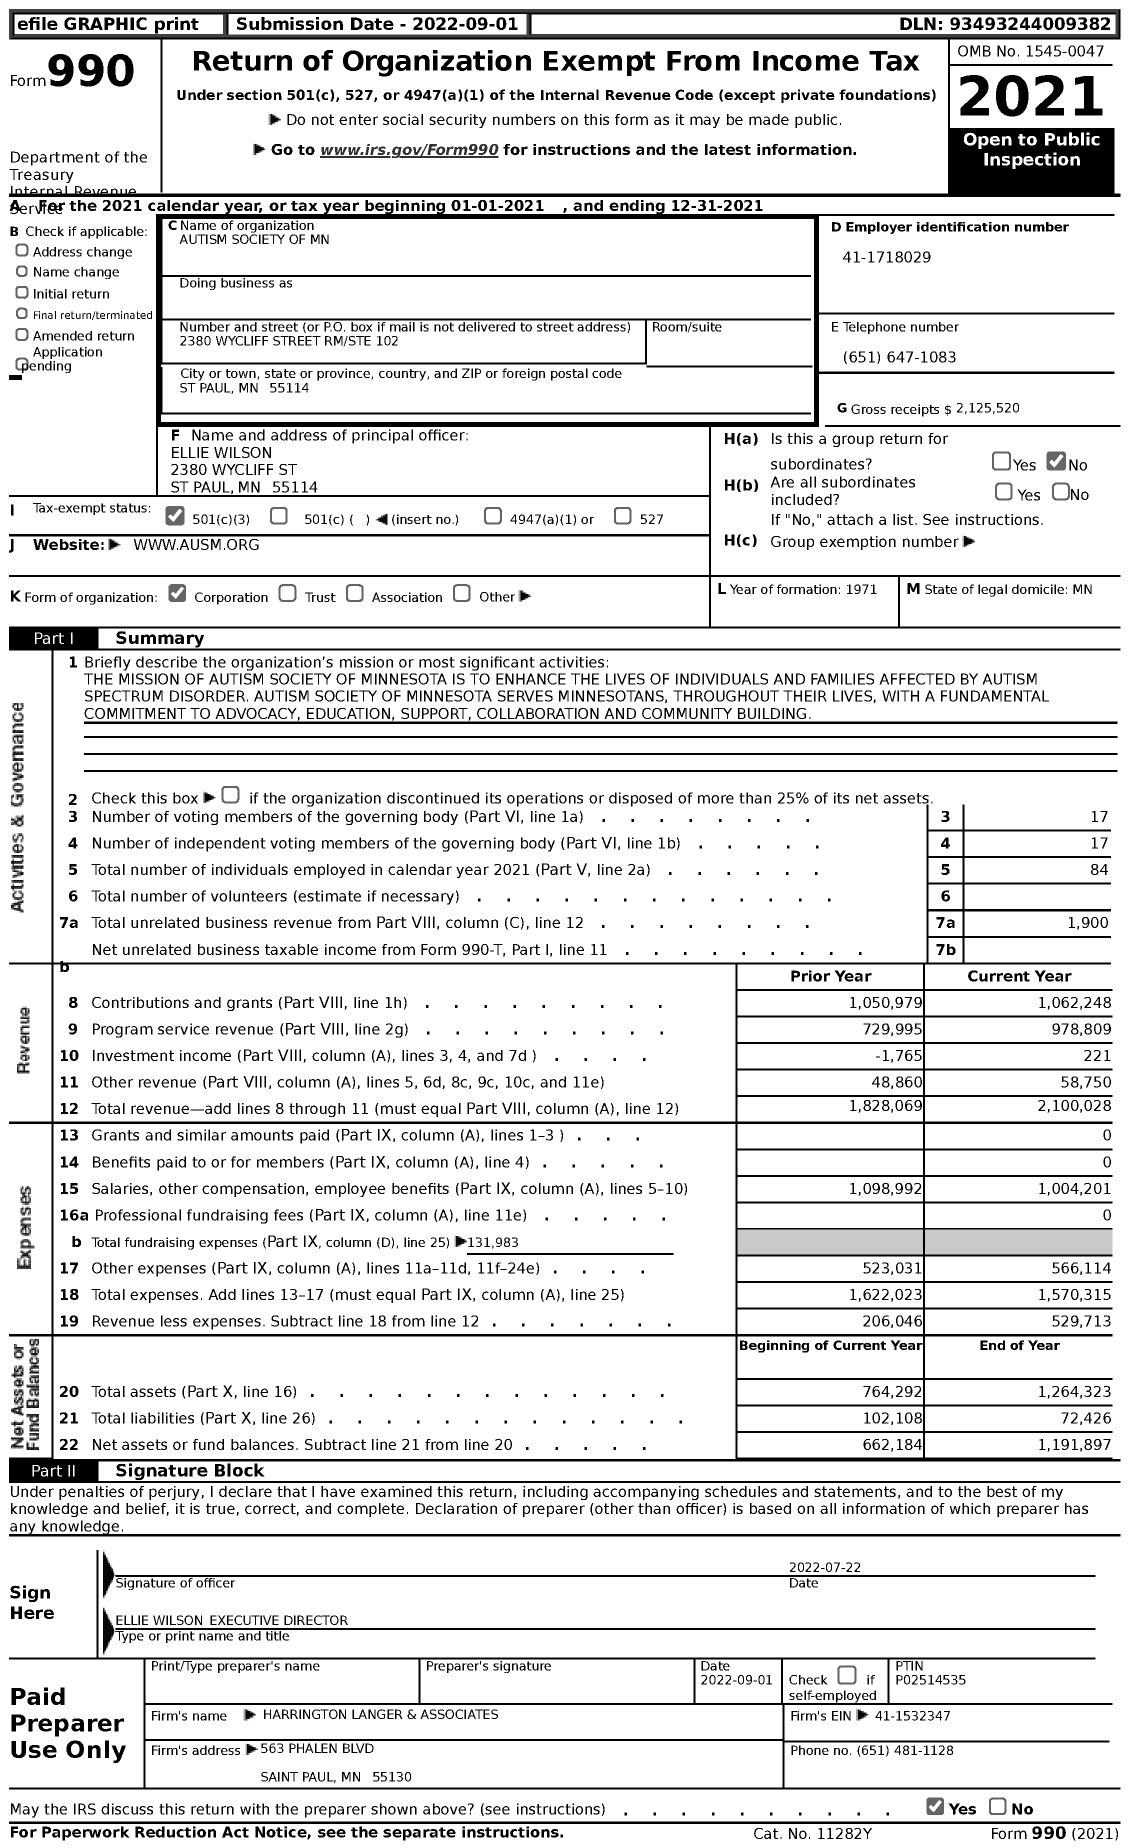 Image of first page of 2021 Form 990 for Autism Society of Minnesota (ASM)